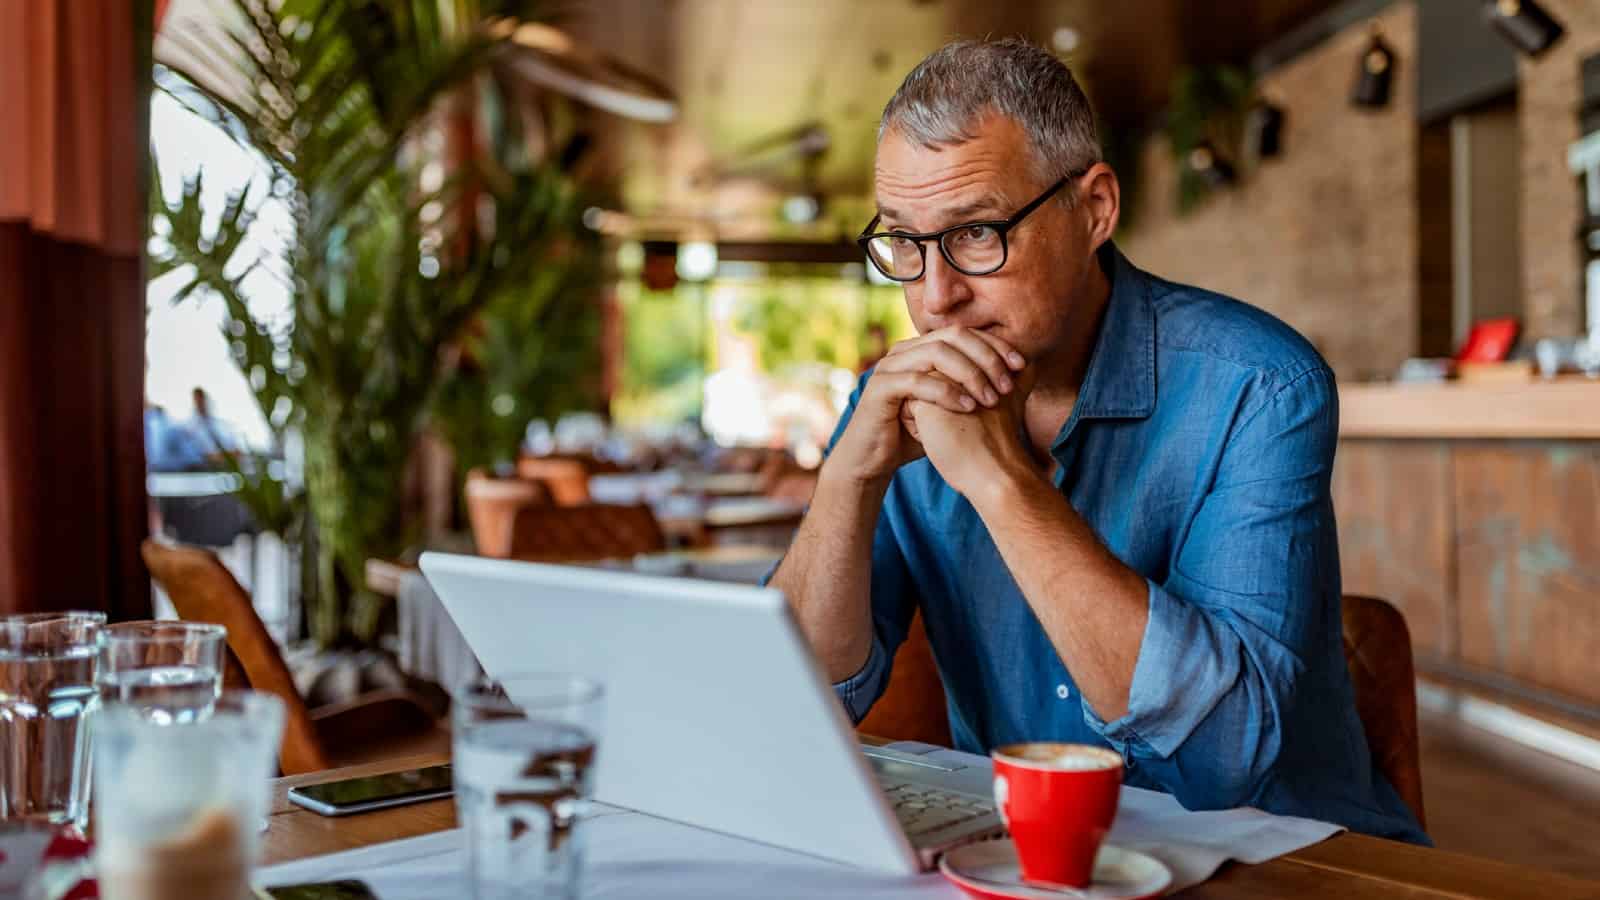 Middle-aged white man wearing glasses, staring into space over the top of his laptop in a coffee shop